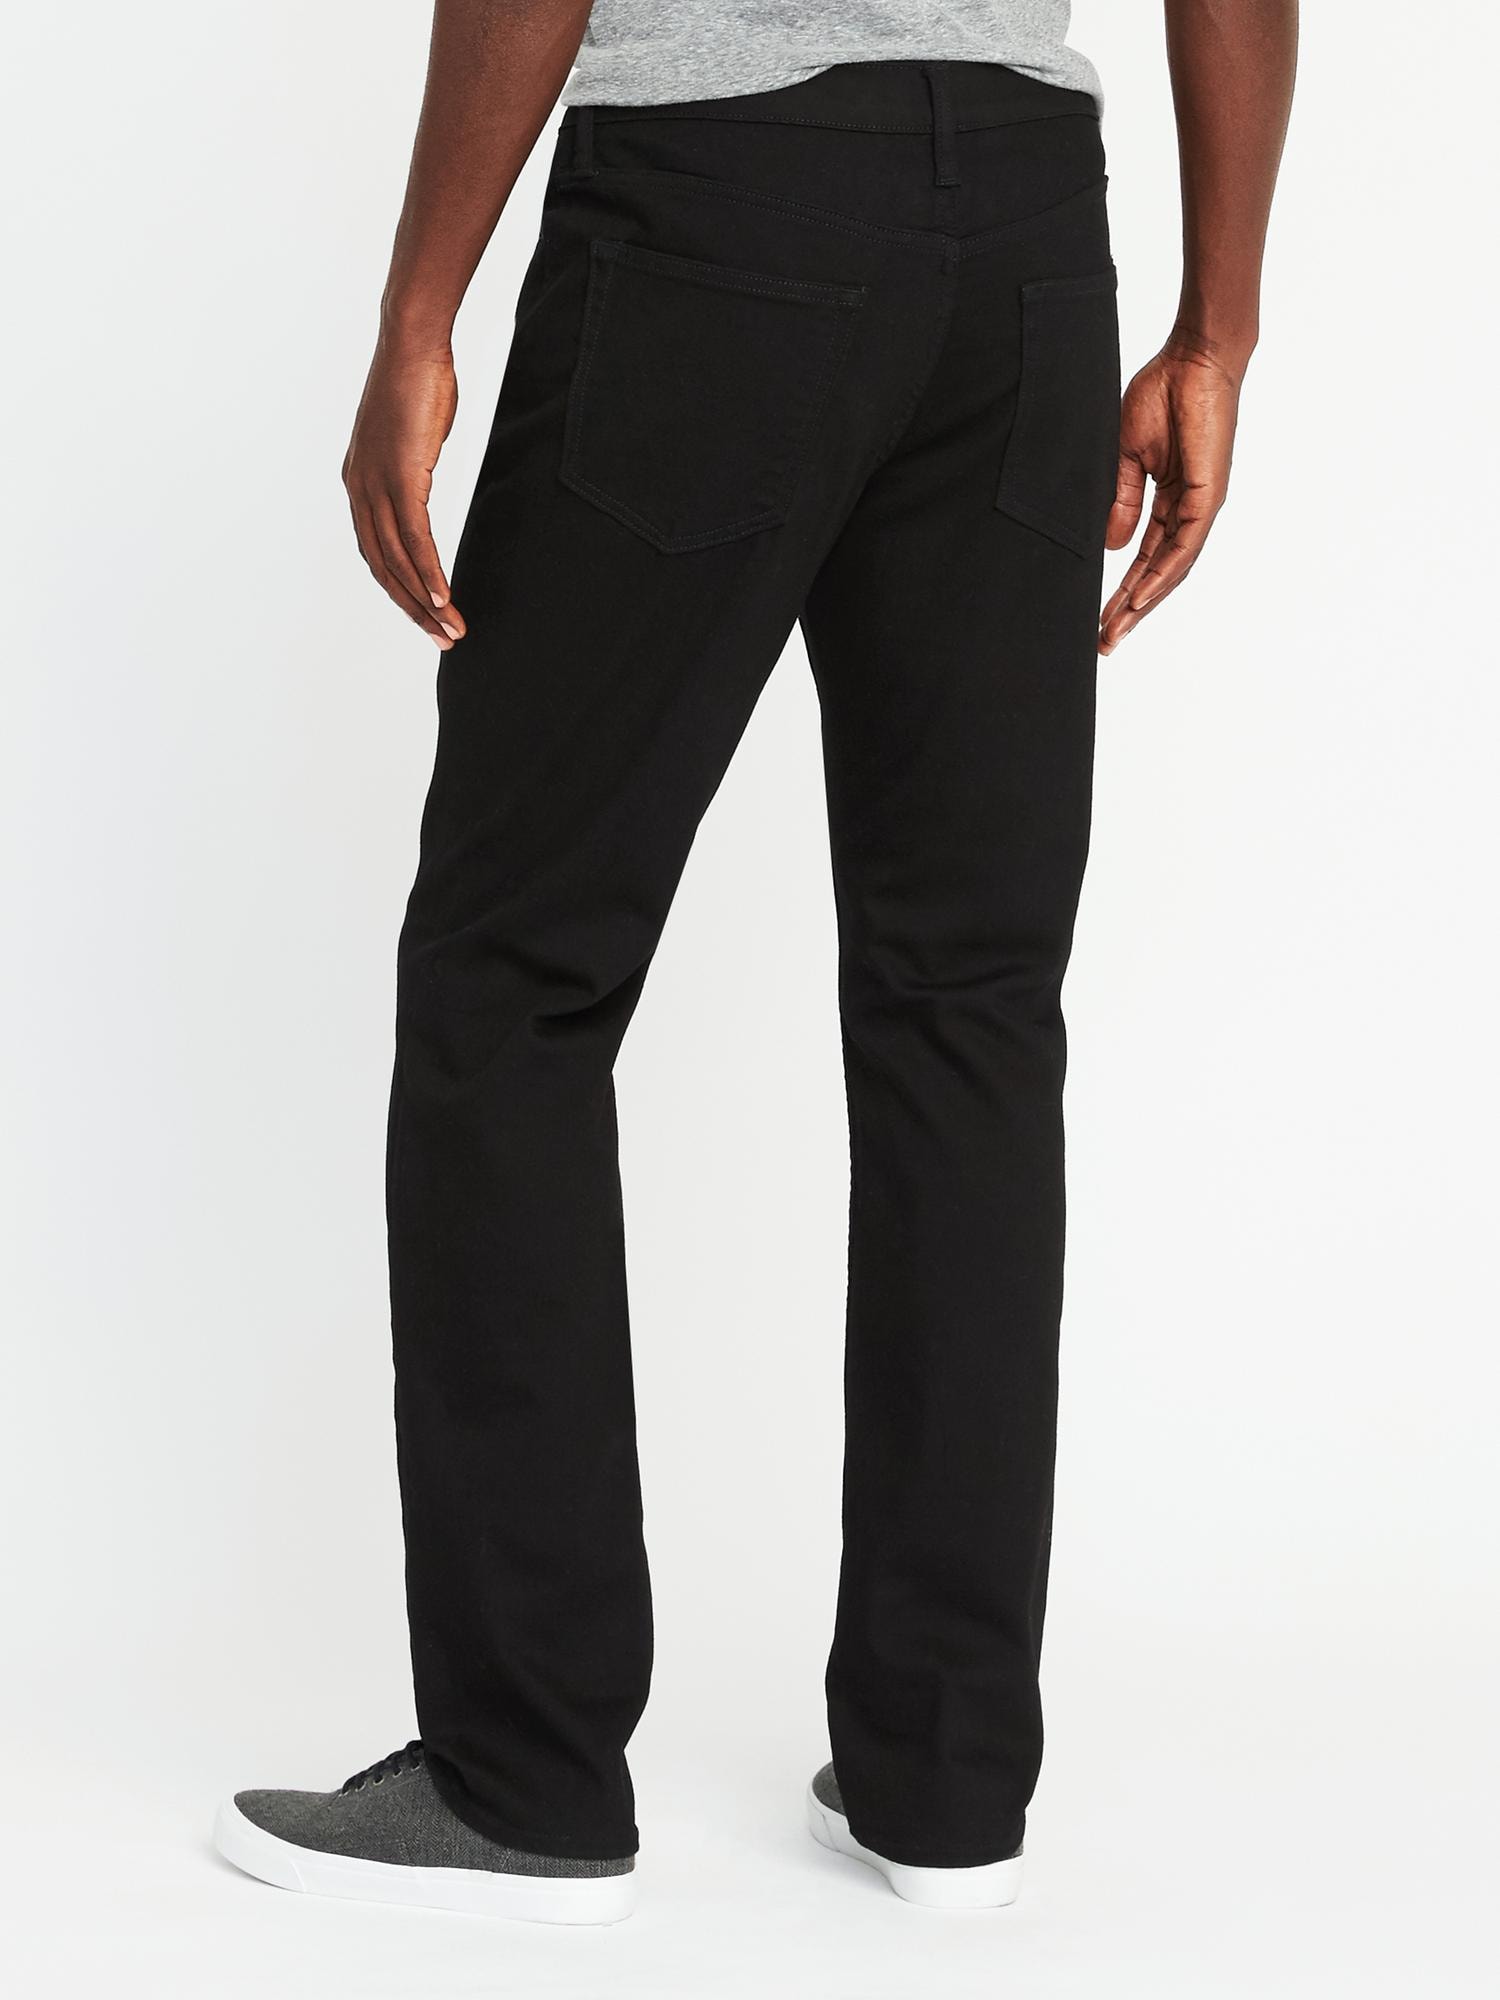 Athletic Built-In Flex Max Never-Fade Jeans | Old Navy